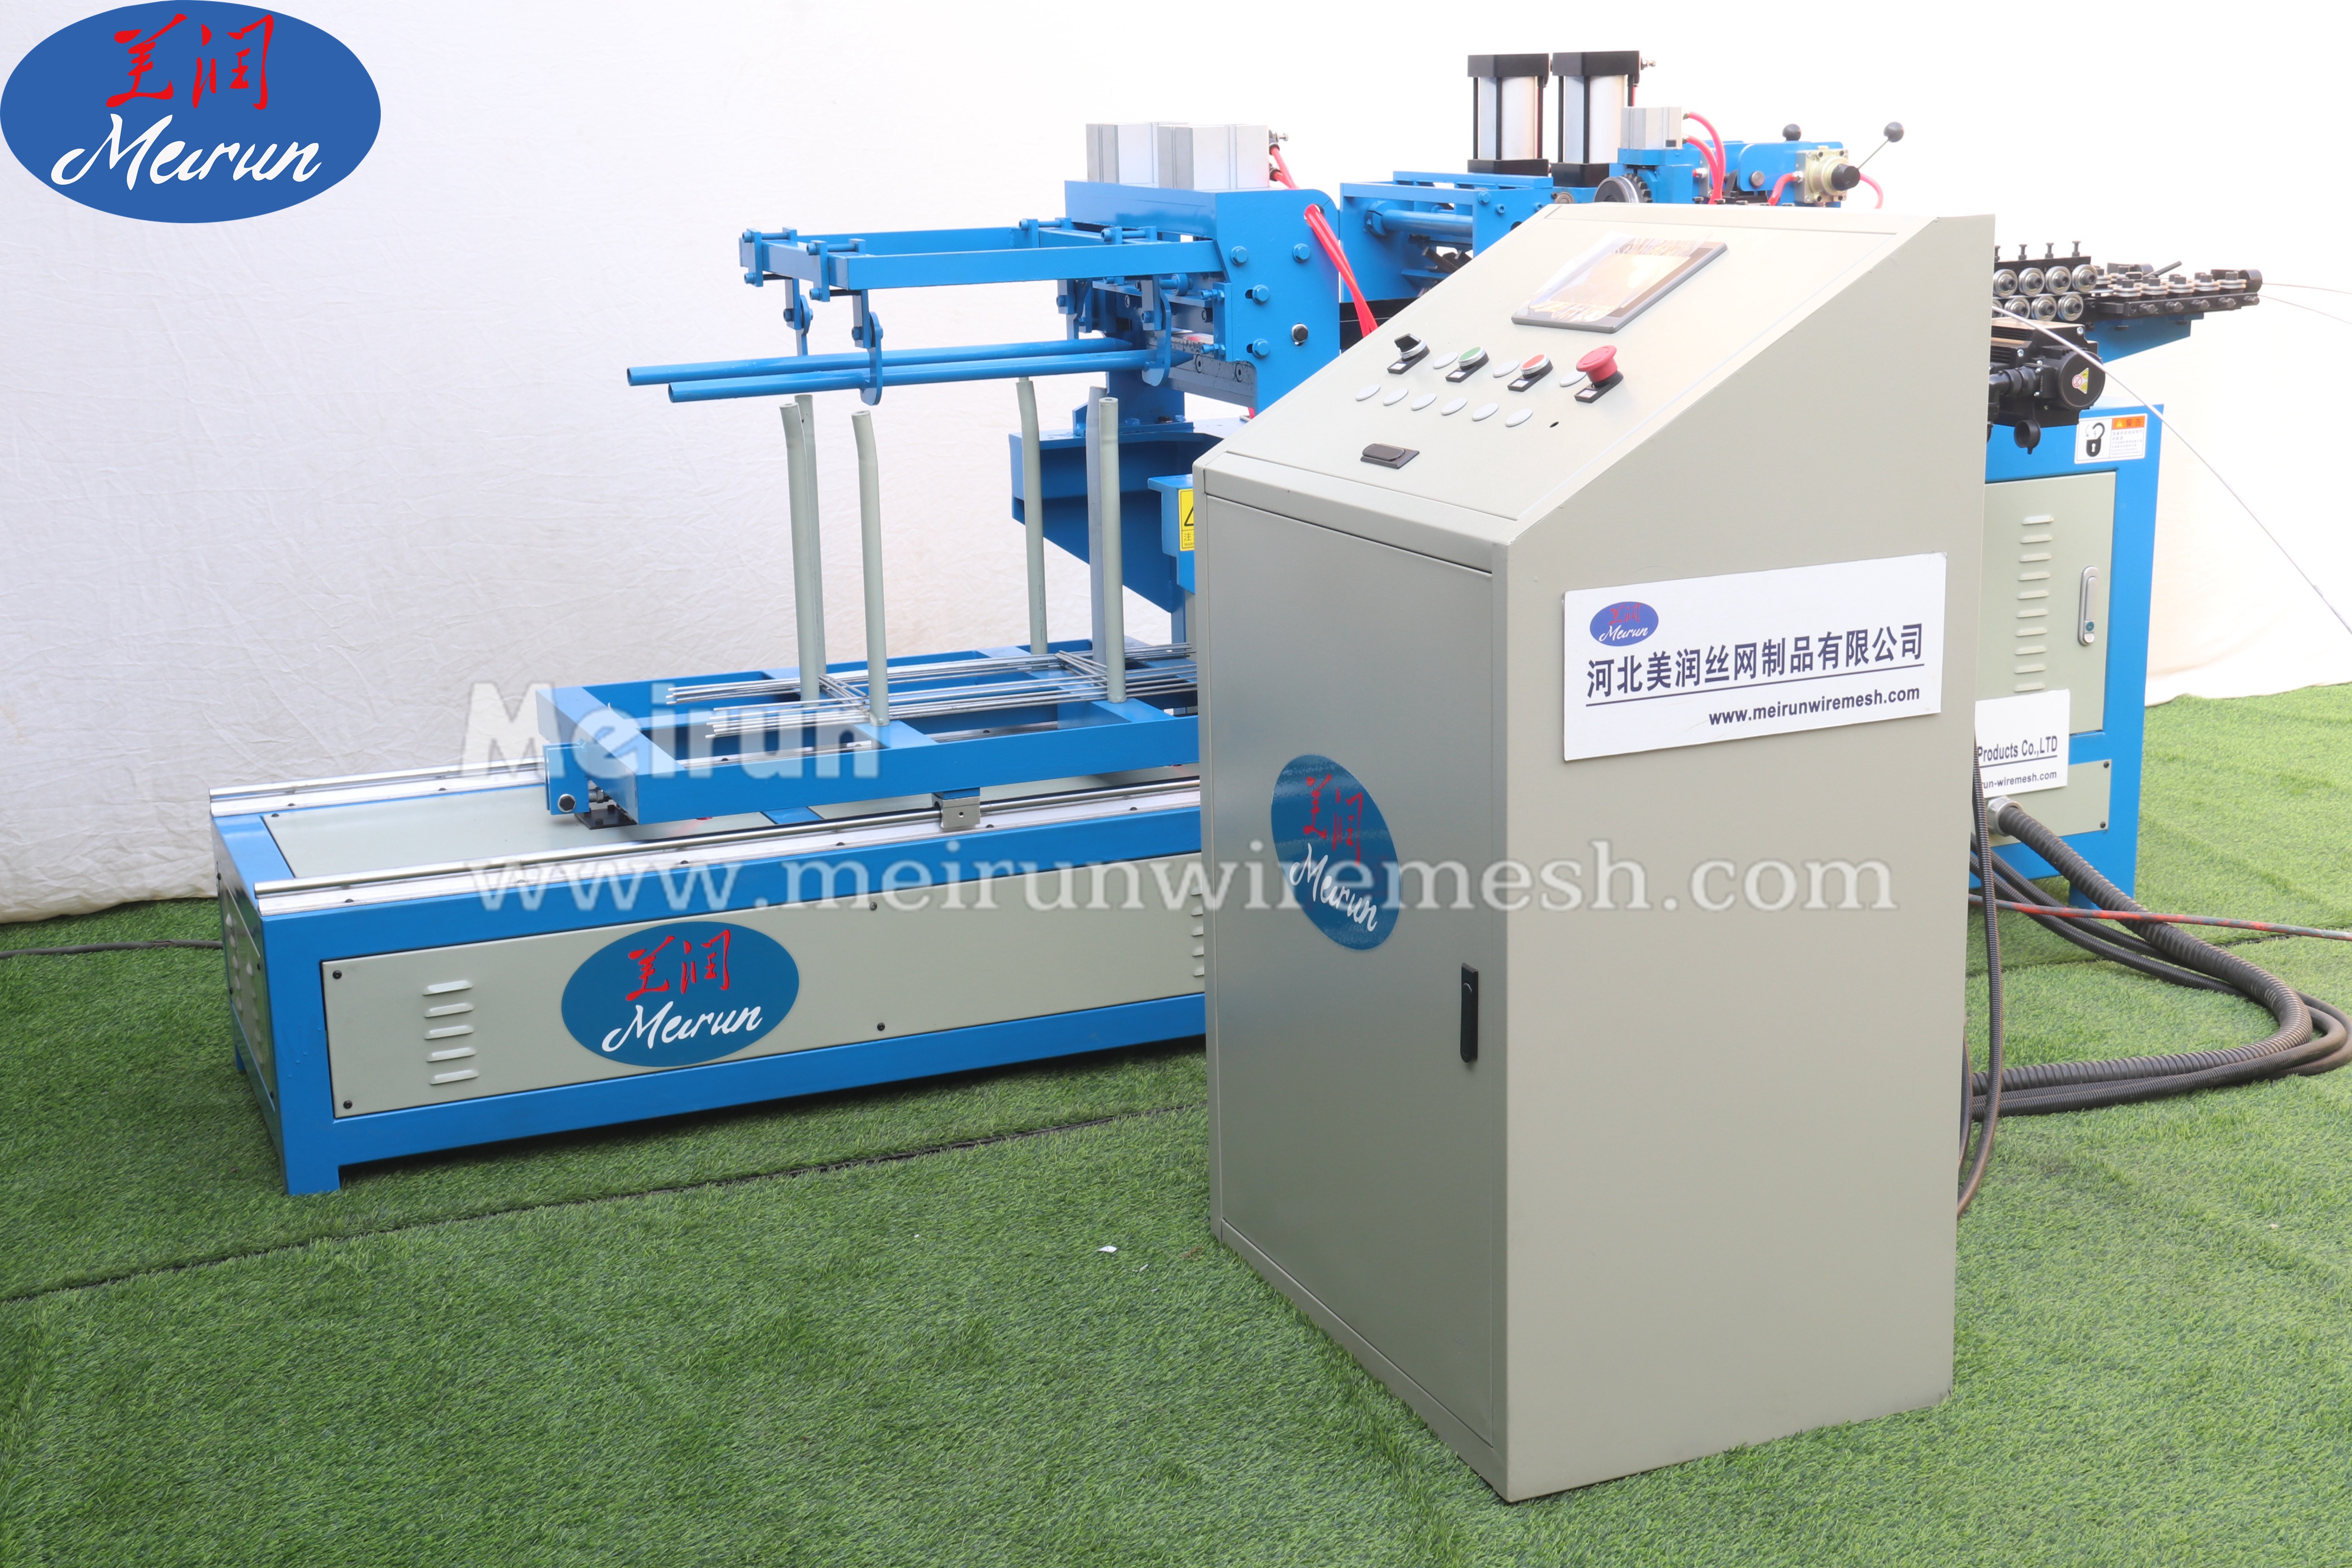 High Speed Brick Force Wire Mesh Welding Machine for South Africa Customer 3 Rolls